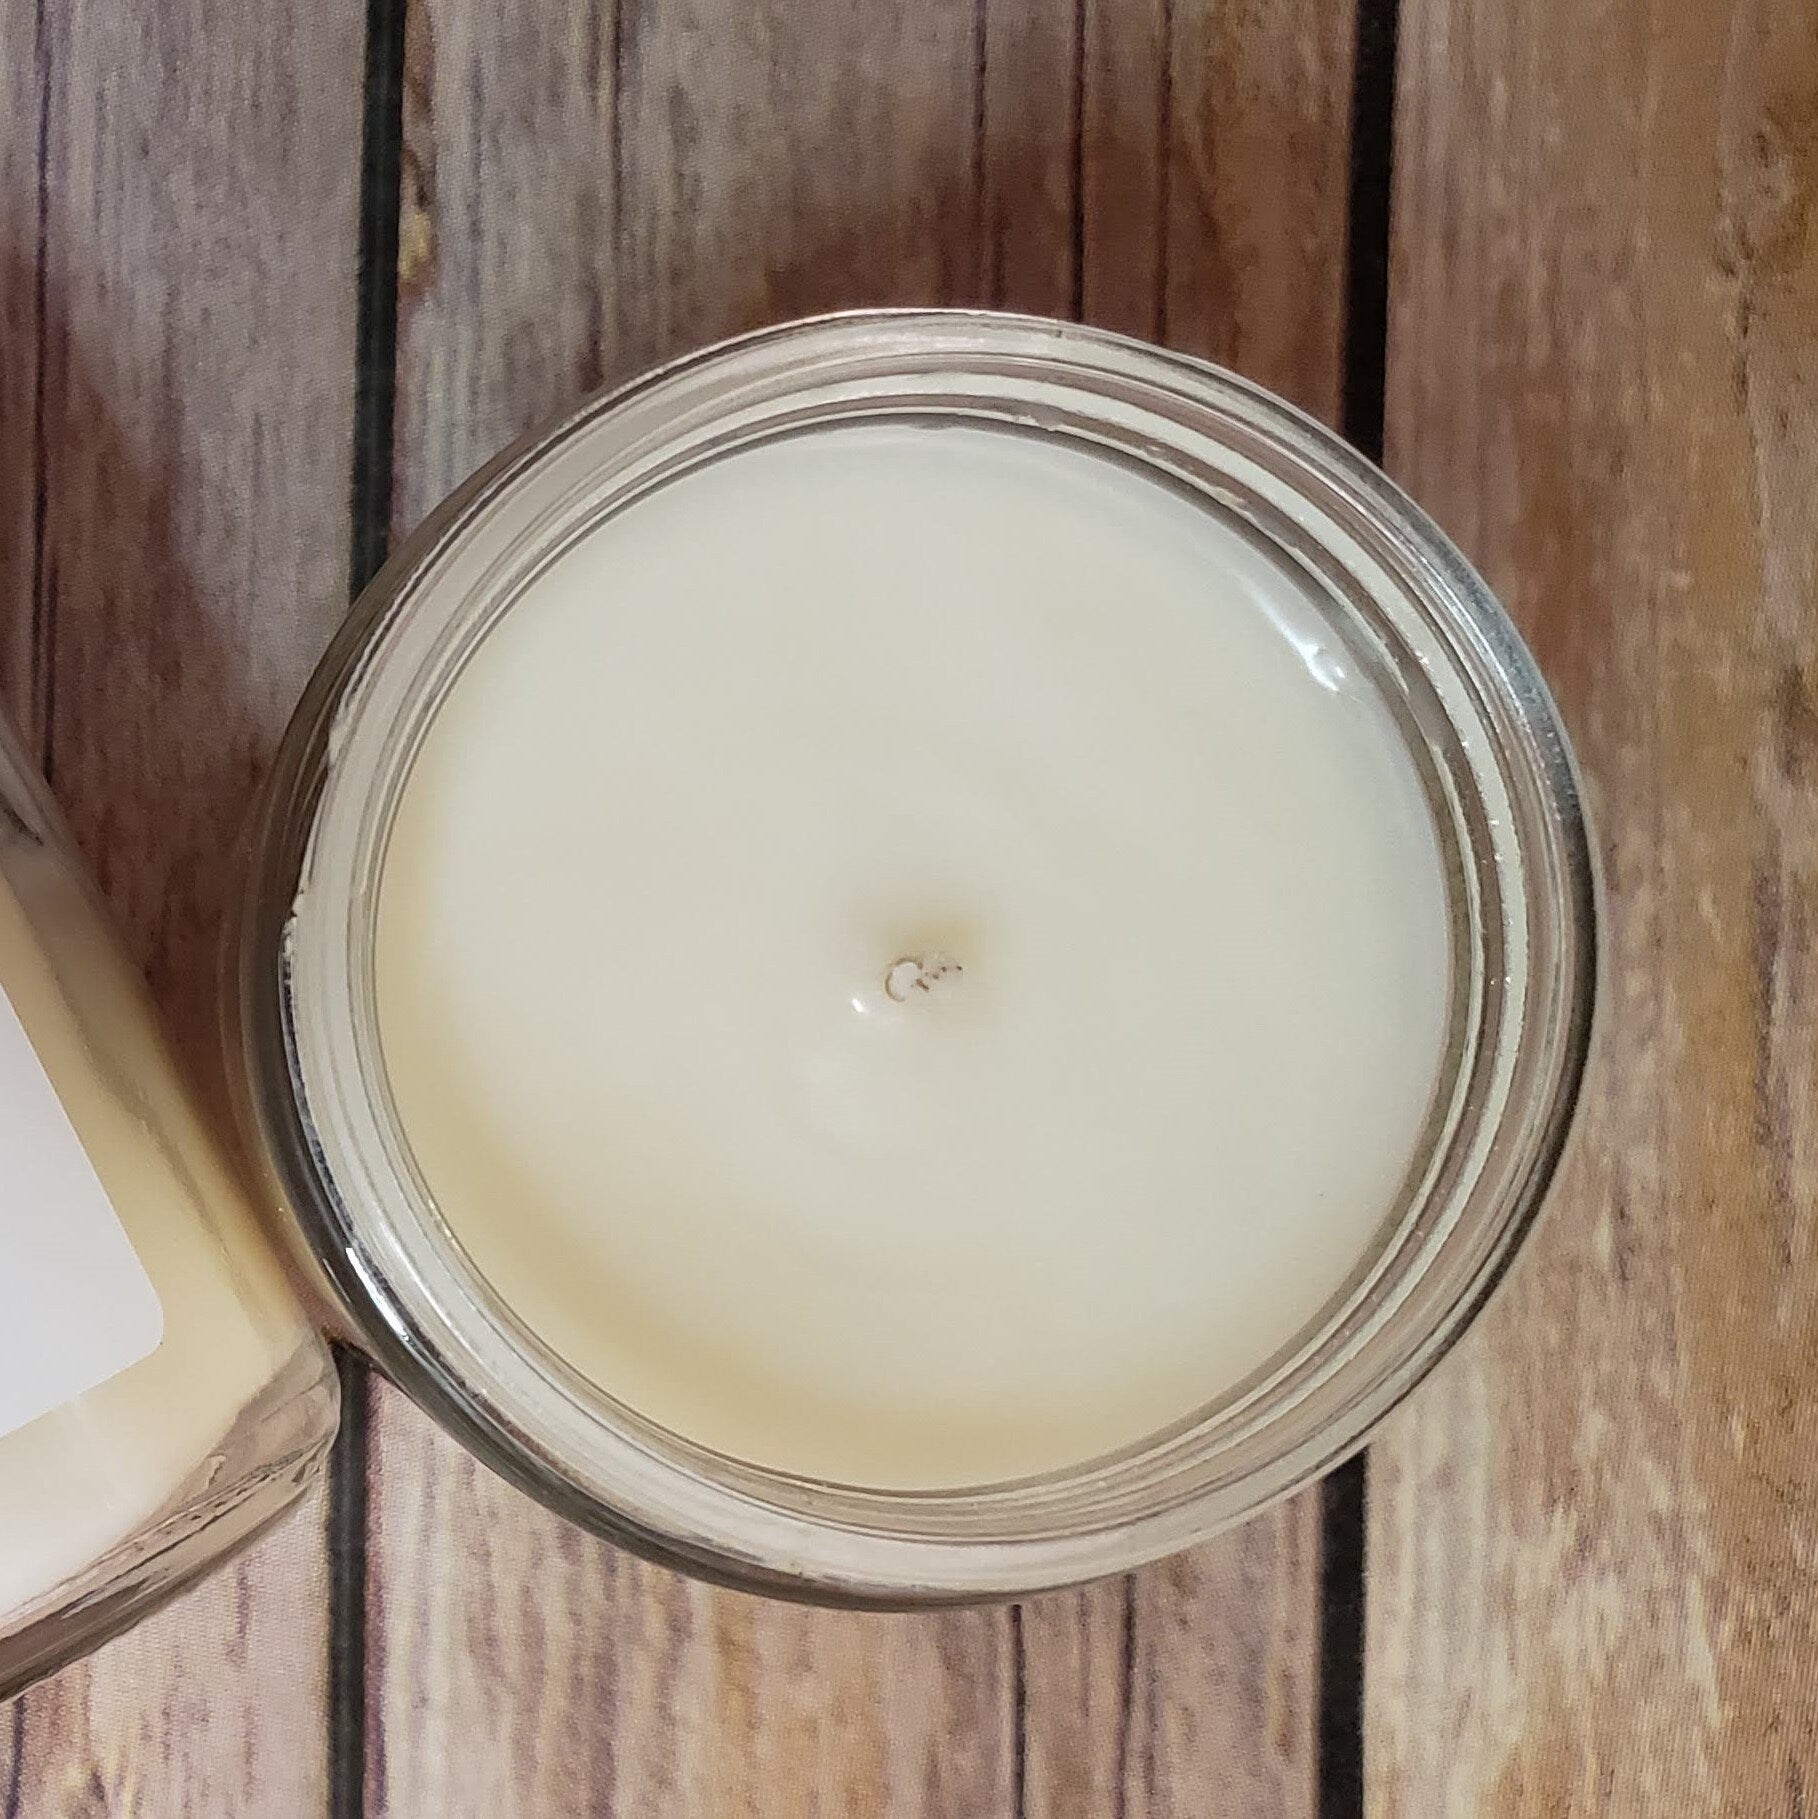 Ivy Creek No 27 | Beach Linen Soy Blend Candle | Hand Poured | 7 oz | Cotton Wick | Small Batch | Clean Burning | Container Candle